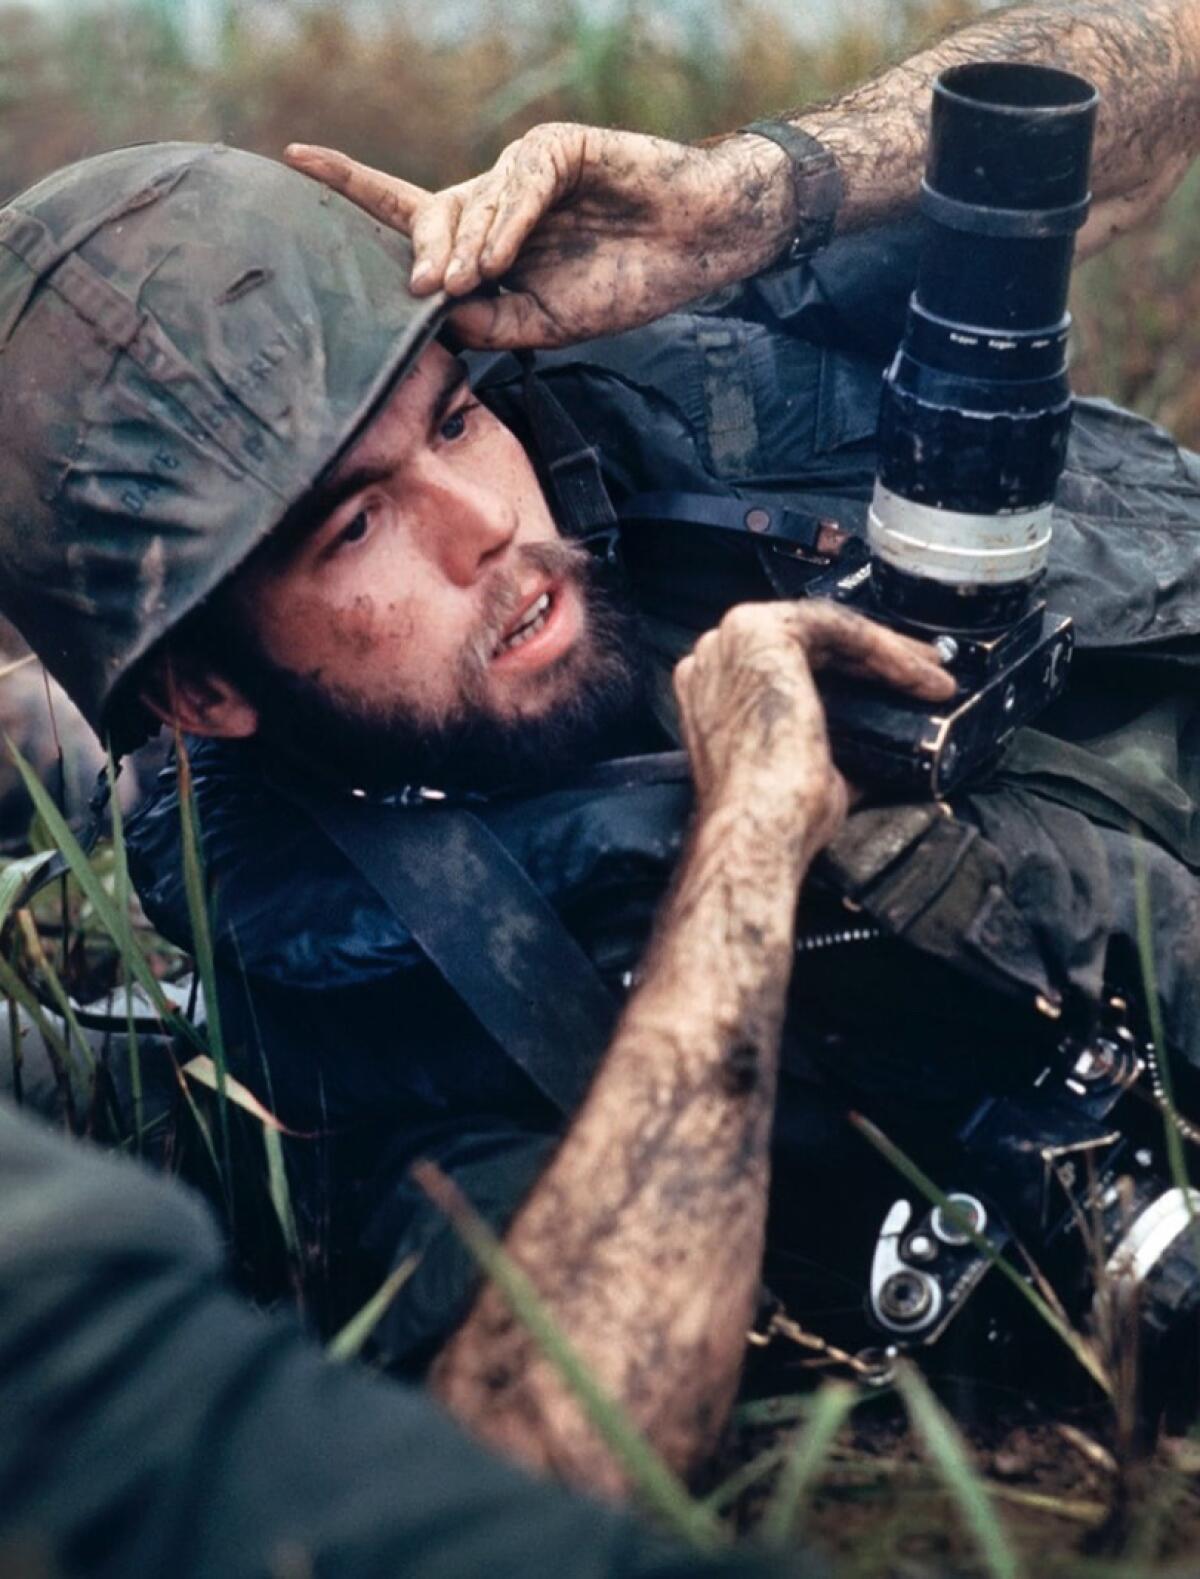 David Hume Kennerly takes cover during a firefight one day after winning the Pulitzer Prize.